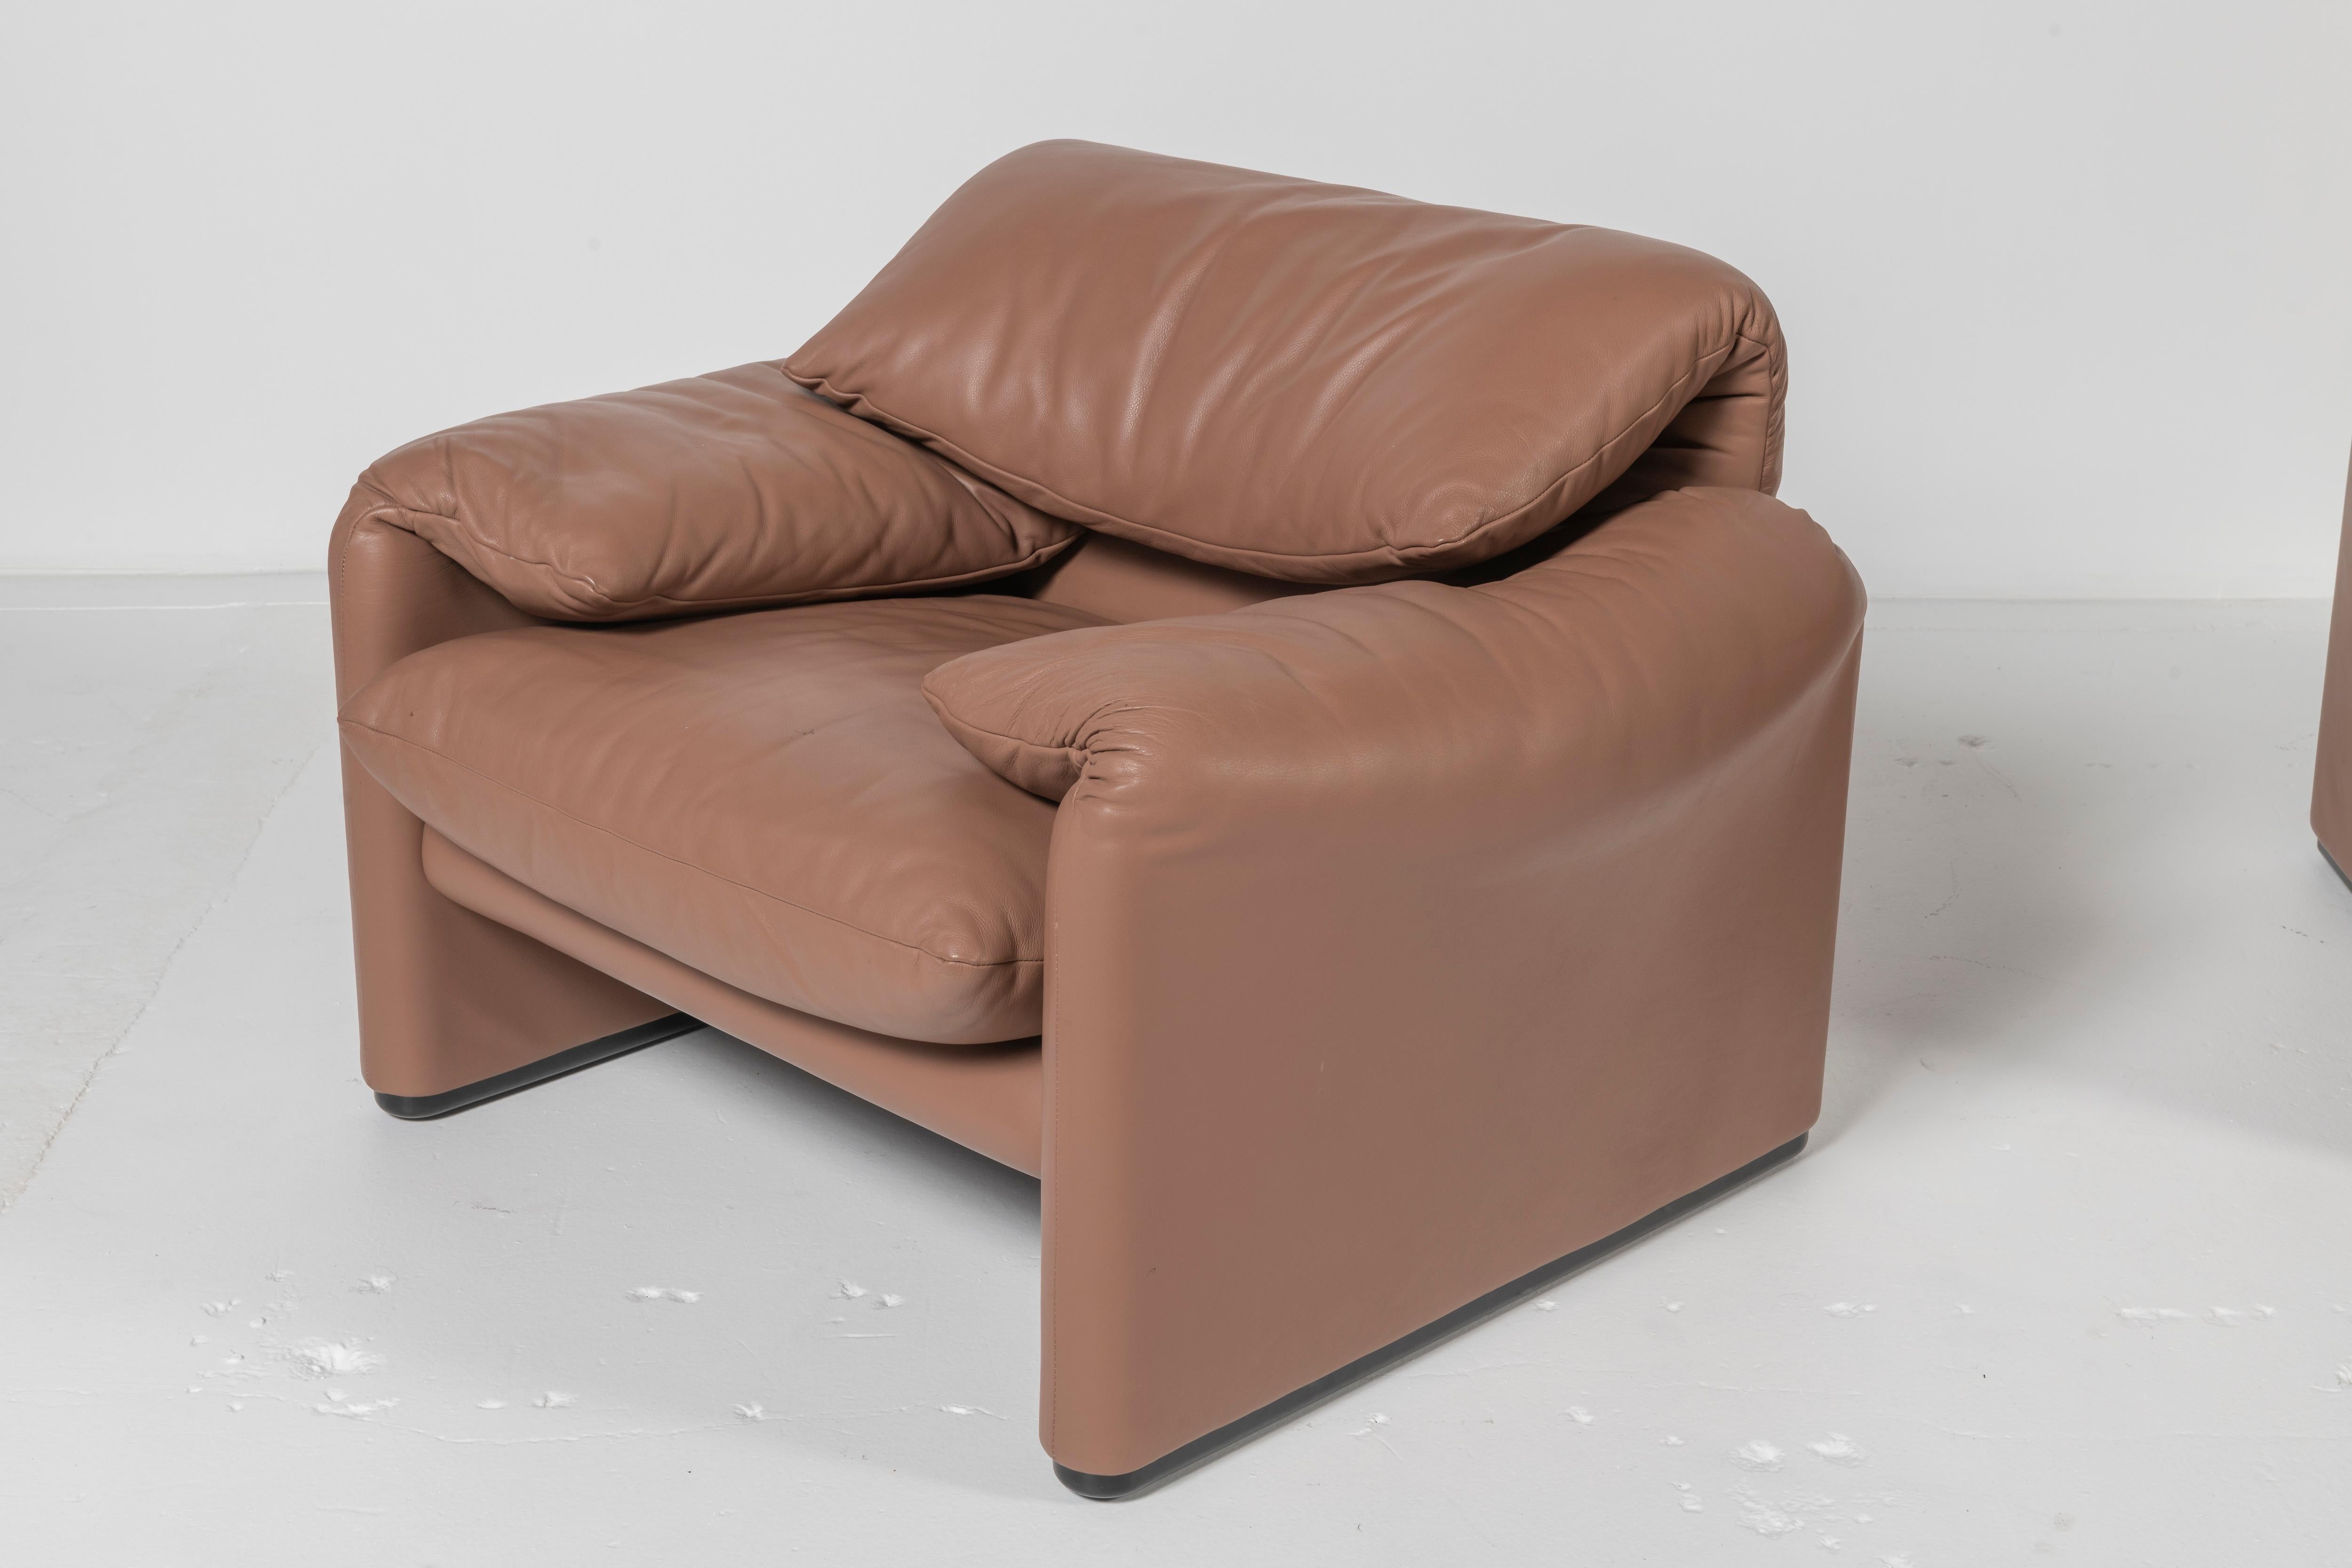 Pair of Maralunga Lounge Chairs with Ottoman in Tan Leather by Cassina 3